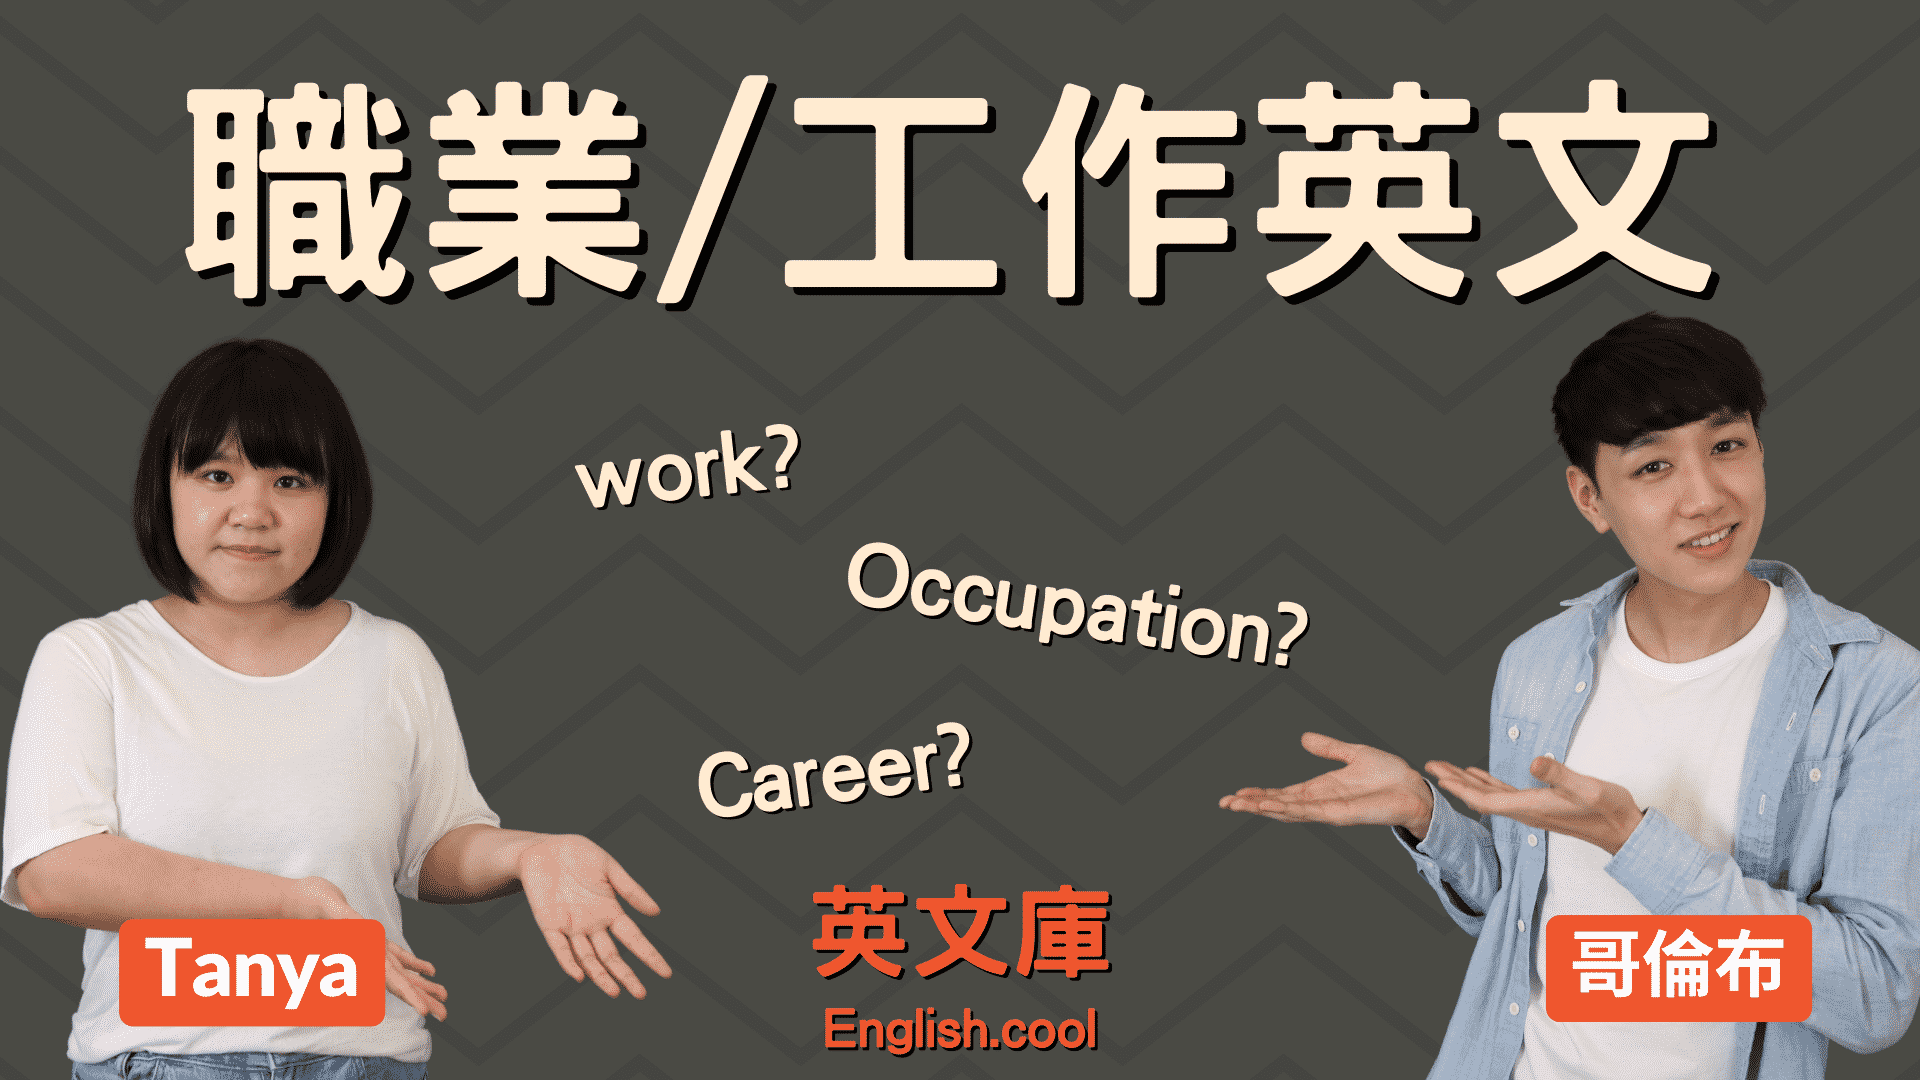 You are currently viewing 「職業/工作」該用Job,Work,Career, 還是Occupation?  (含例句）